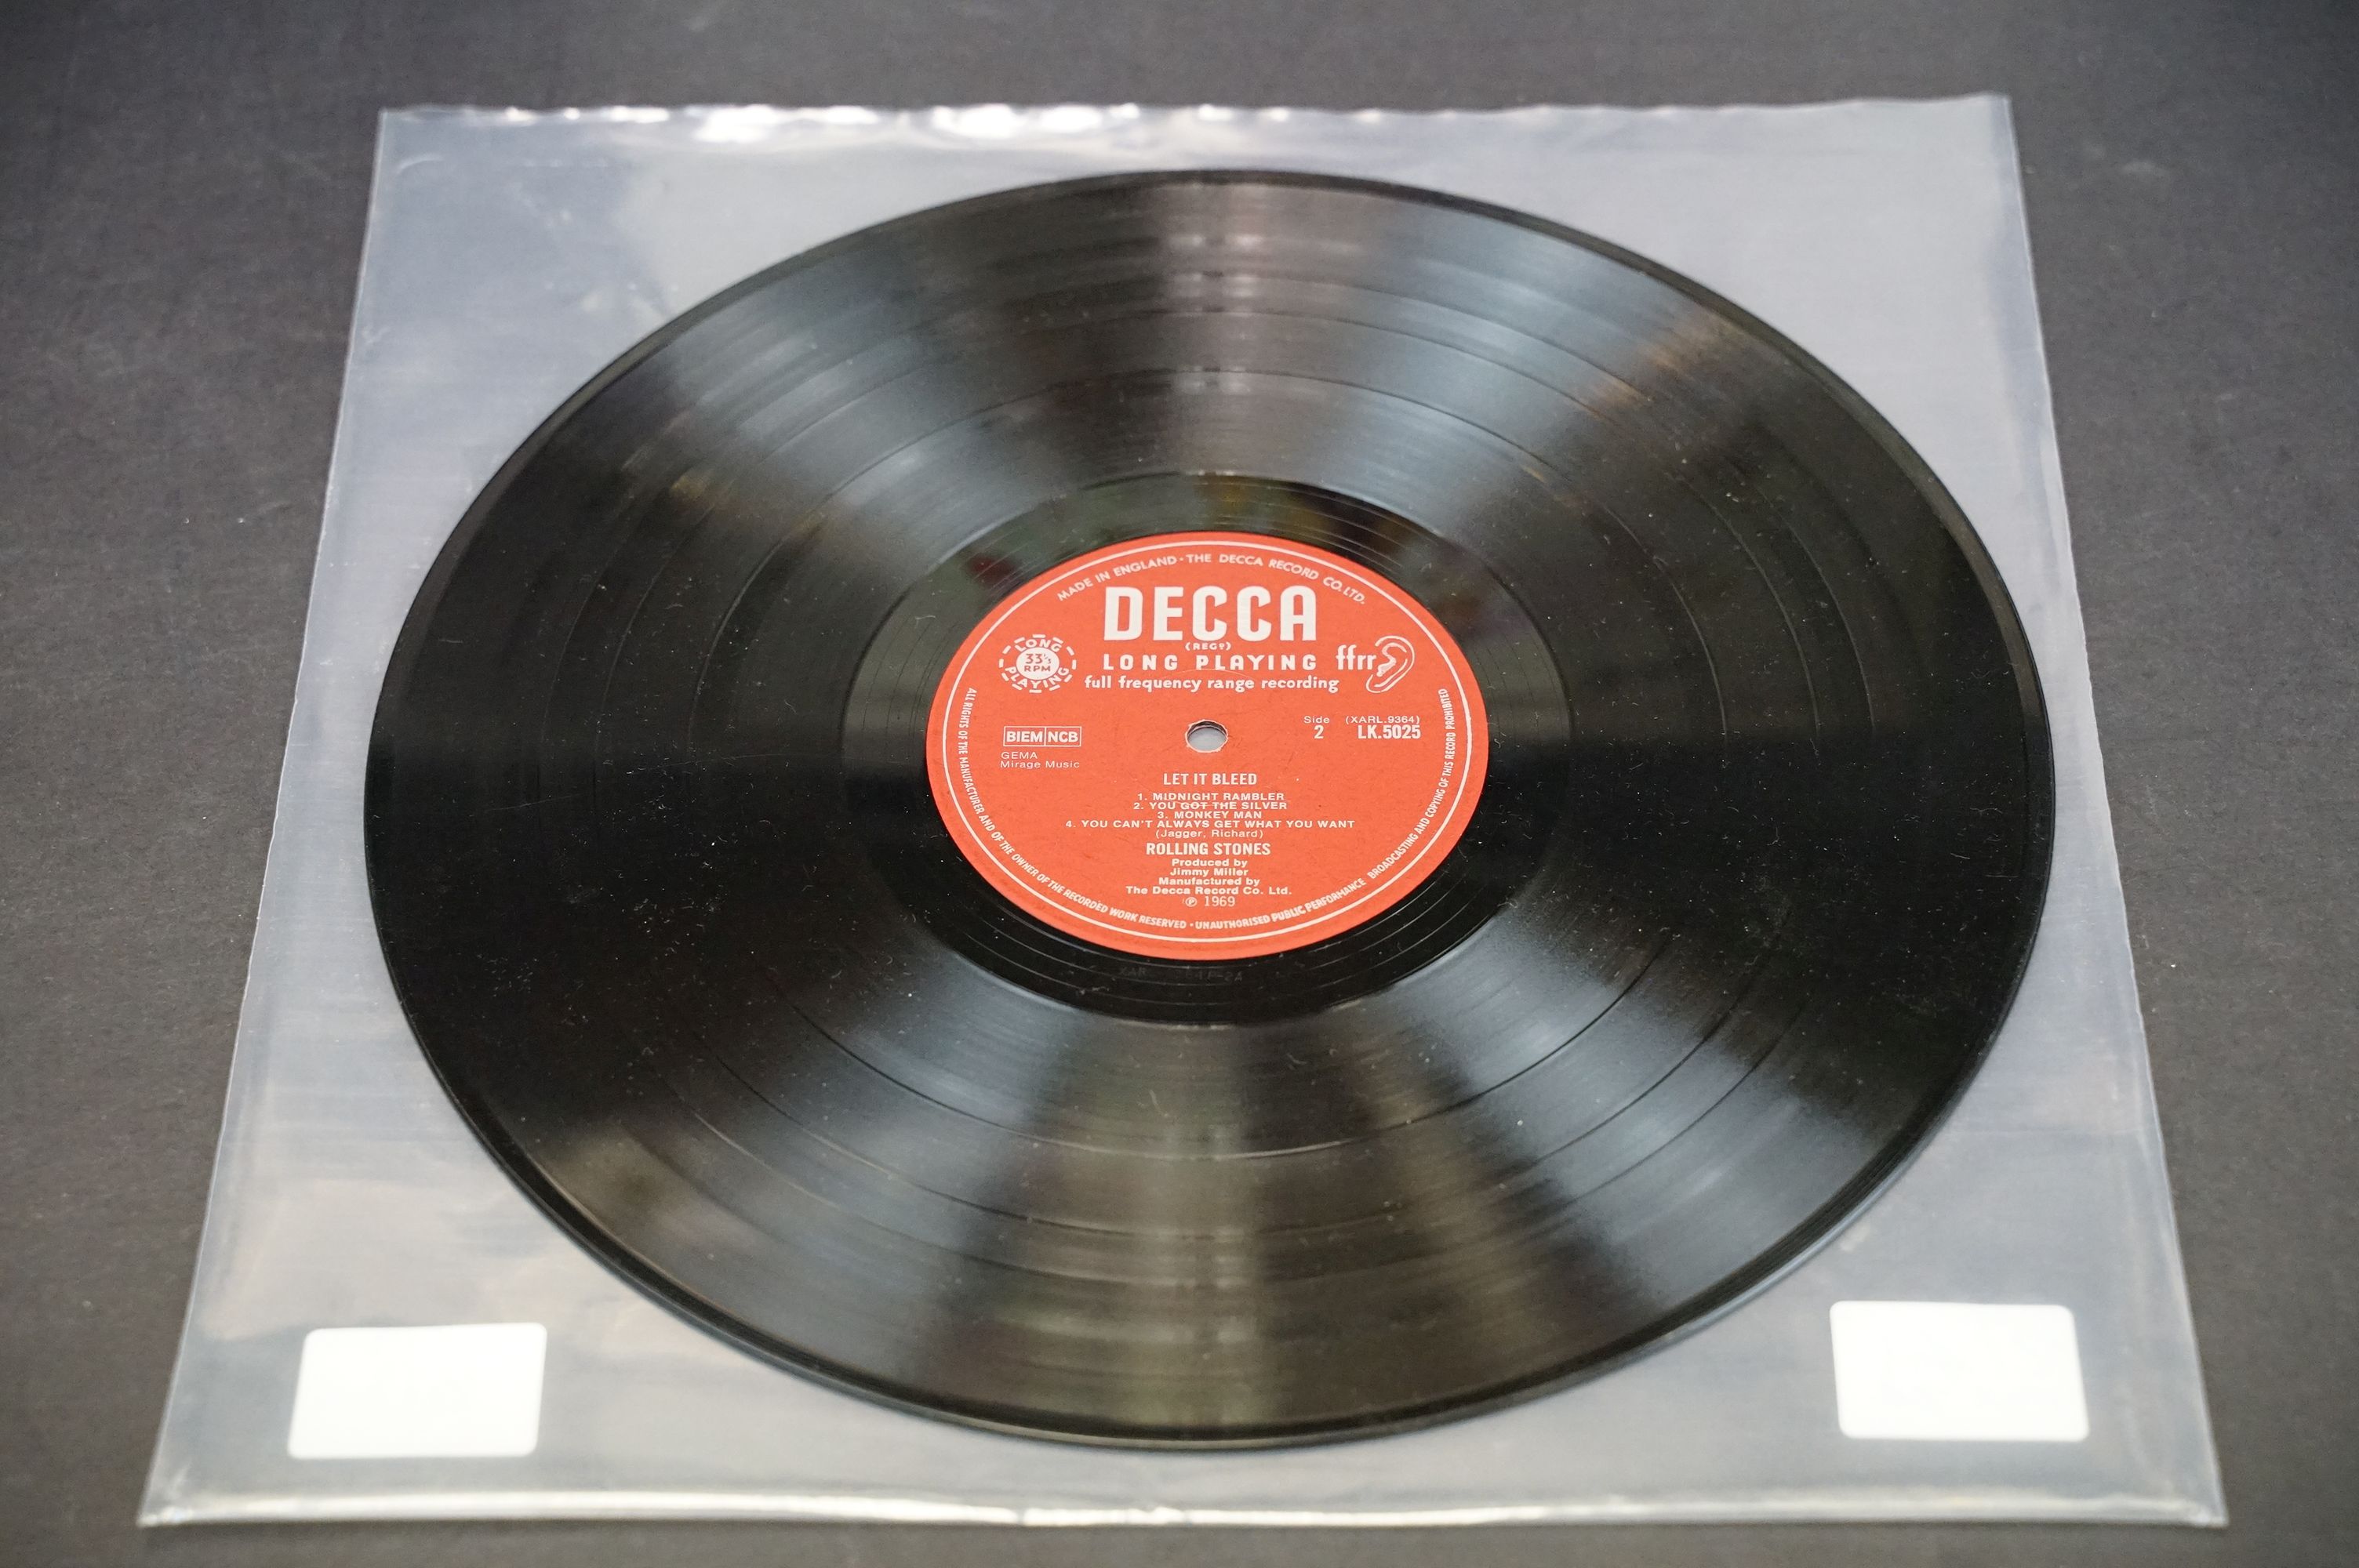 Vinyl - Rolling Stones Let It Bleed on Decca Records LK 5025. Mono pressing with unboxed Decca - Image 5 of 6